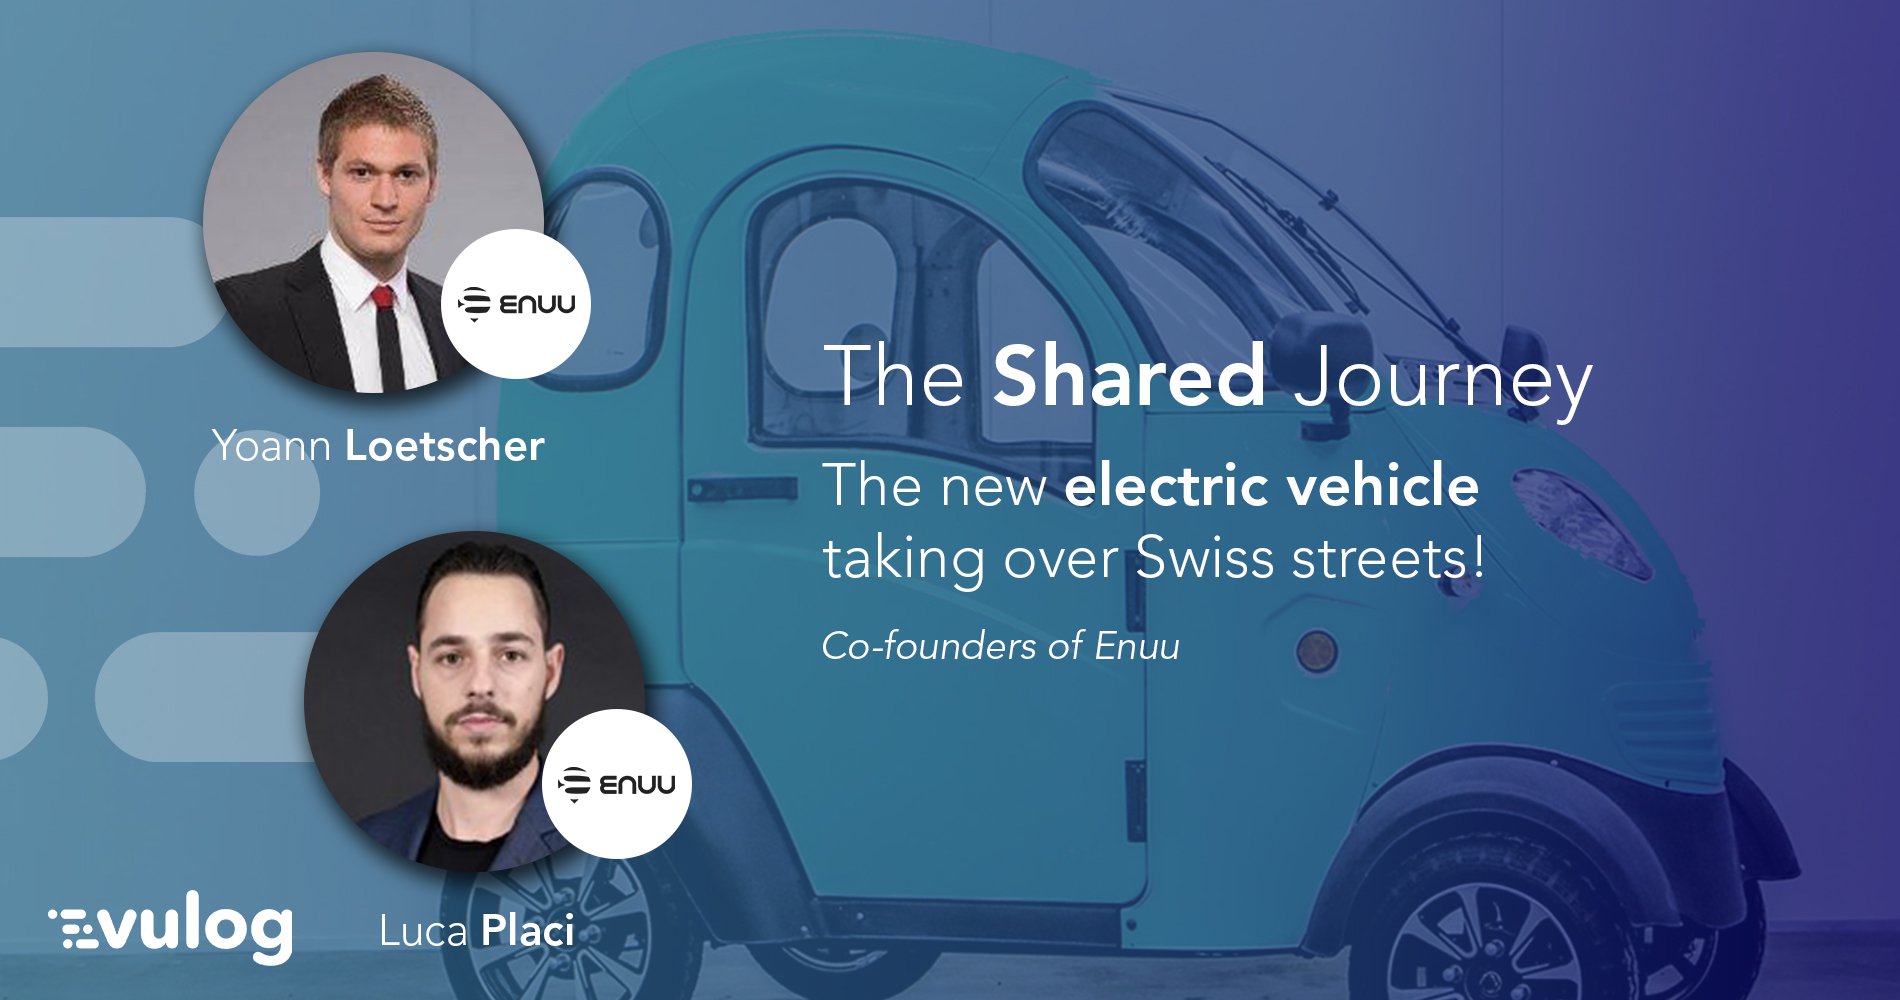 The Shared Journey: New electric vehicle taking over Swiss streets!